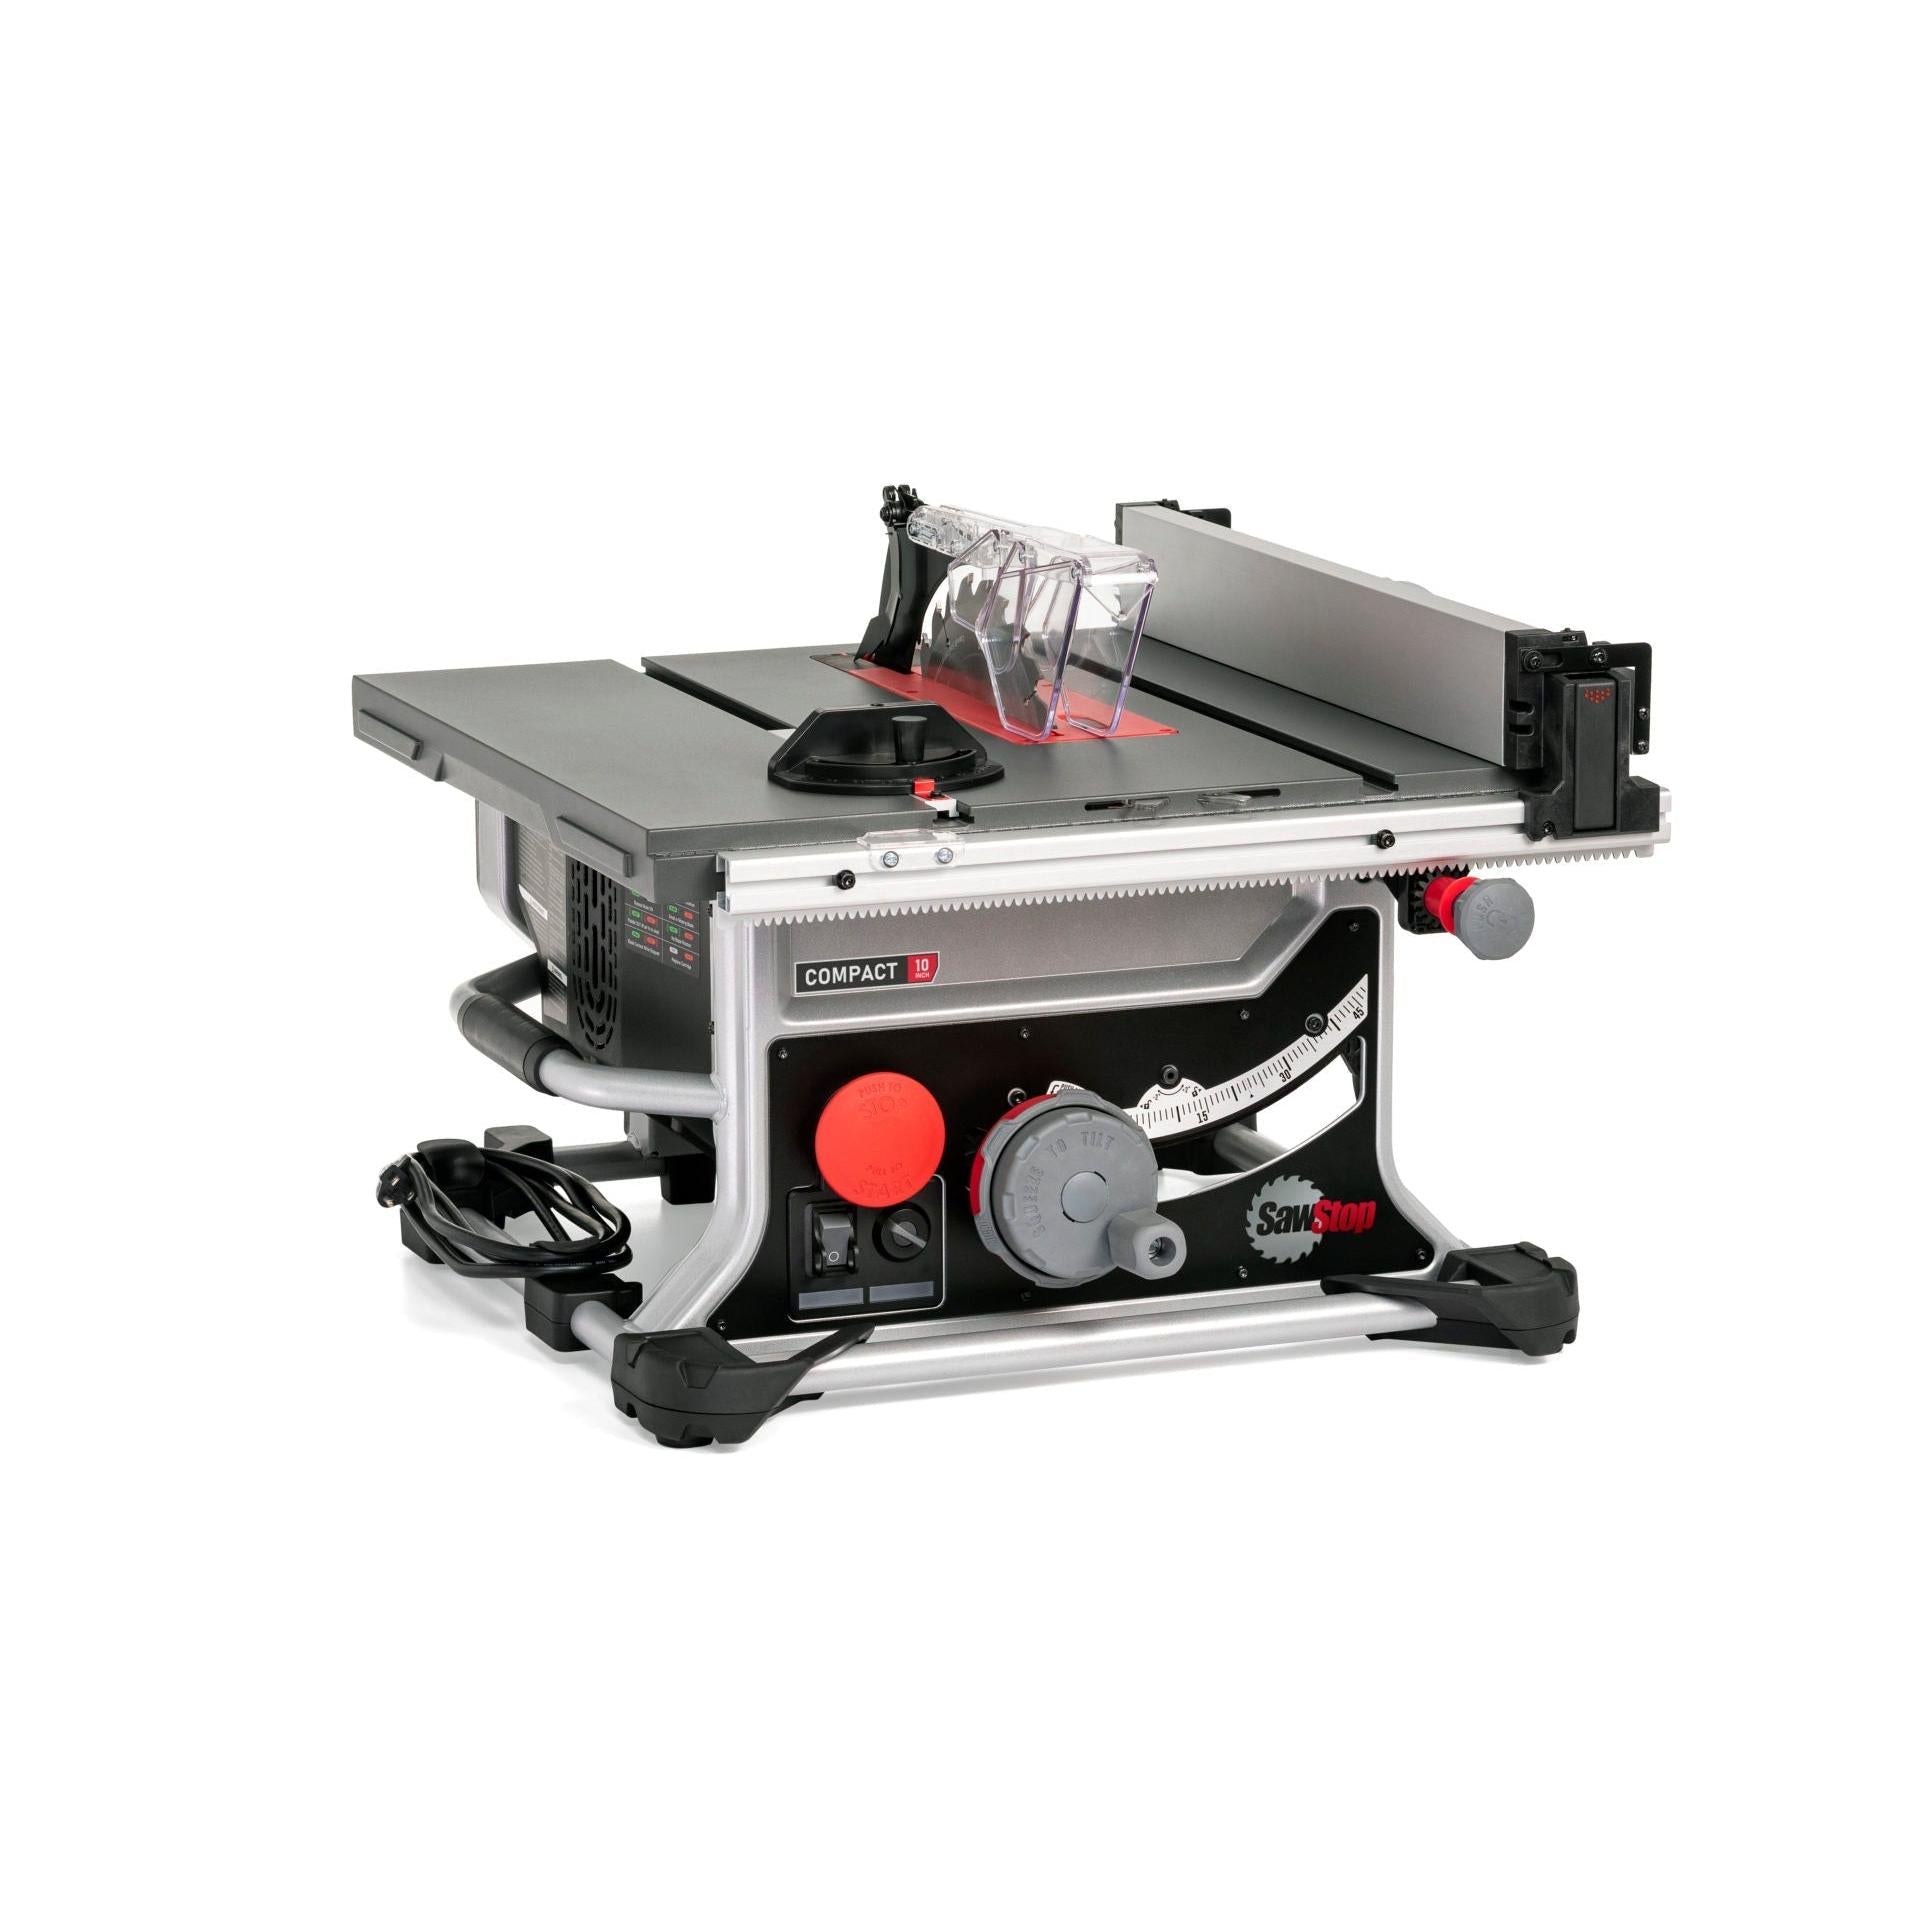 SawStop Compact Table Saw CTS230A50I Power Tool Services